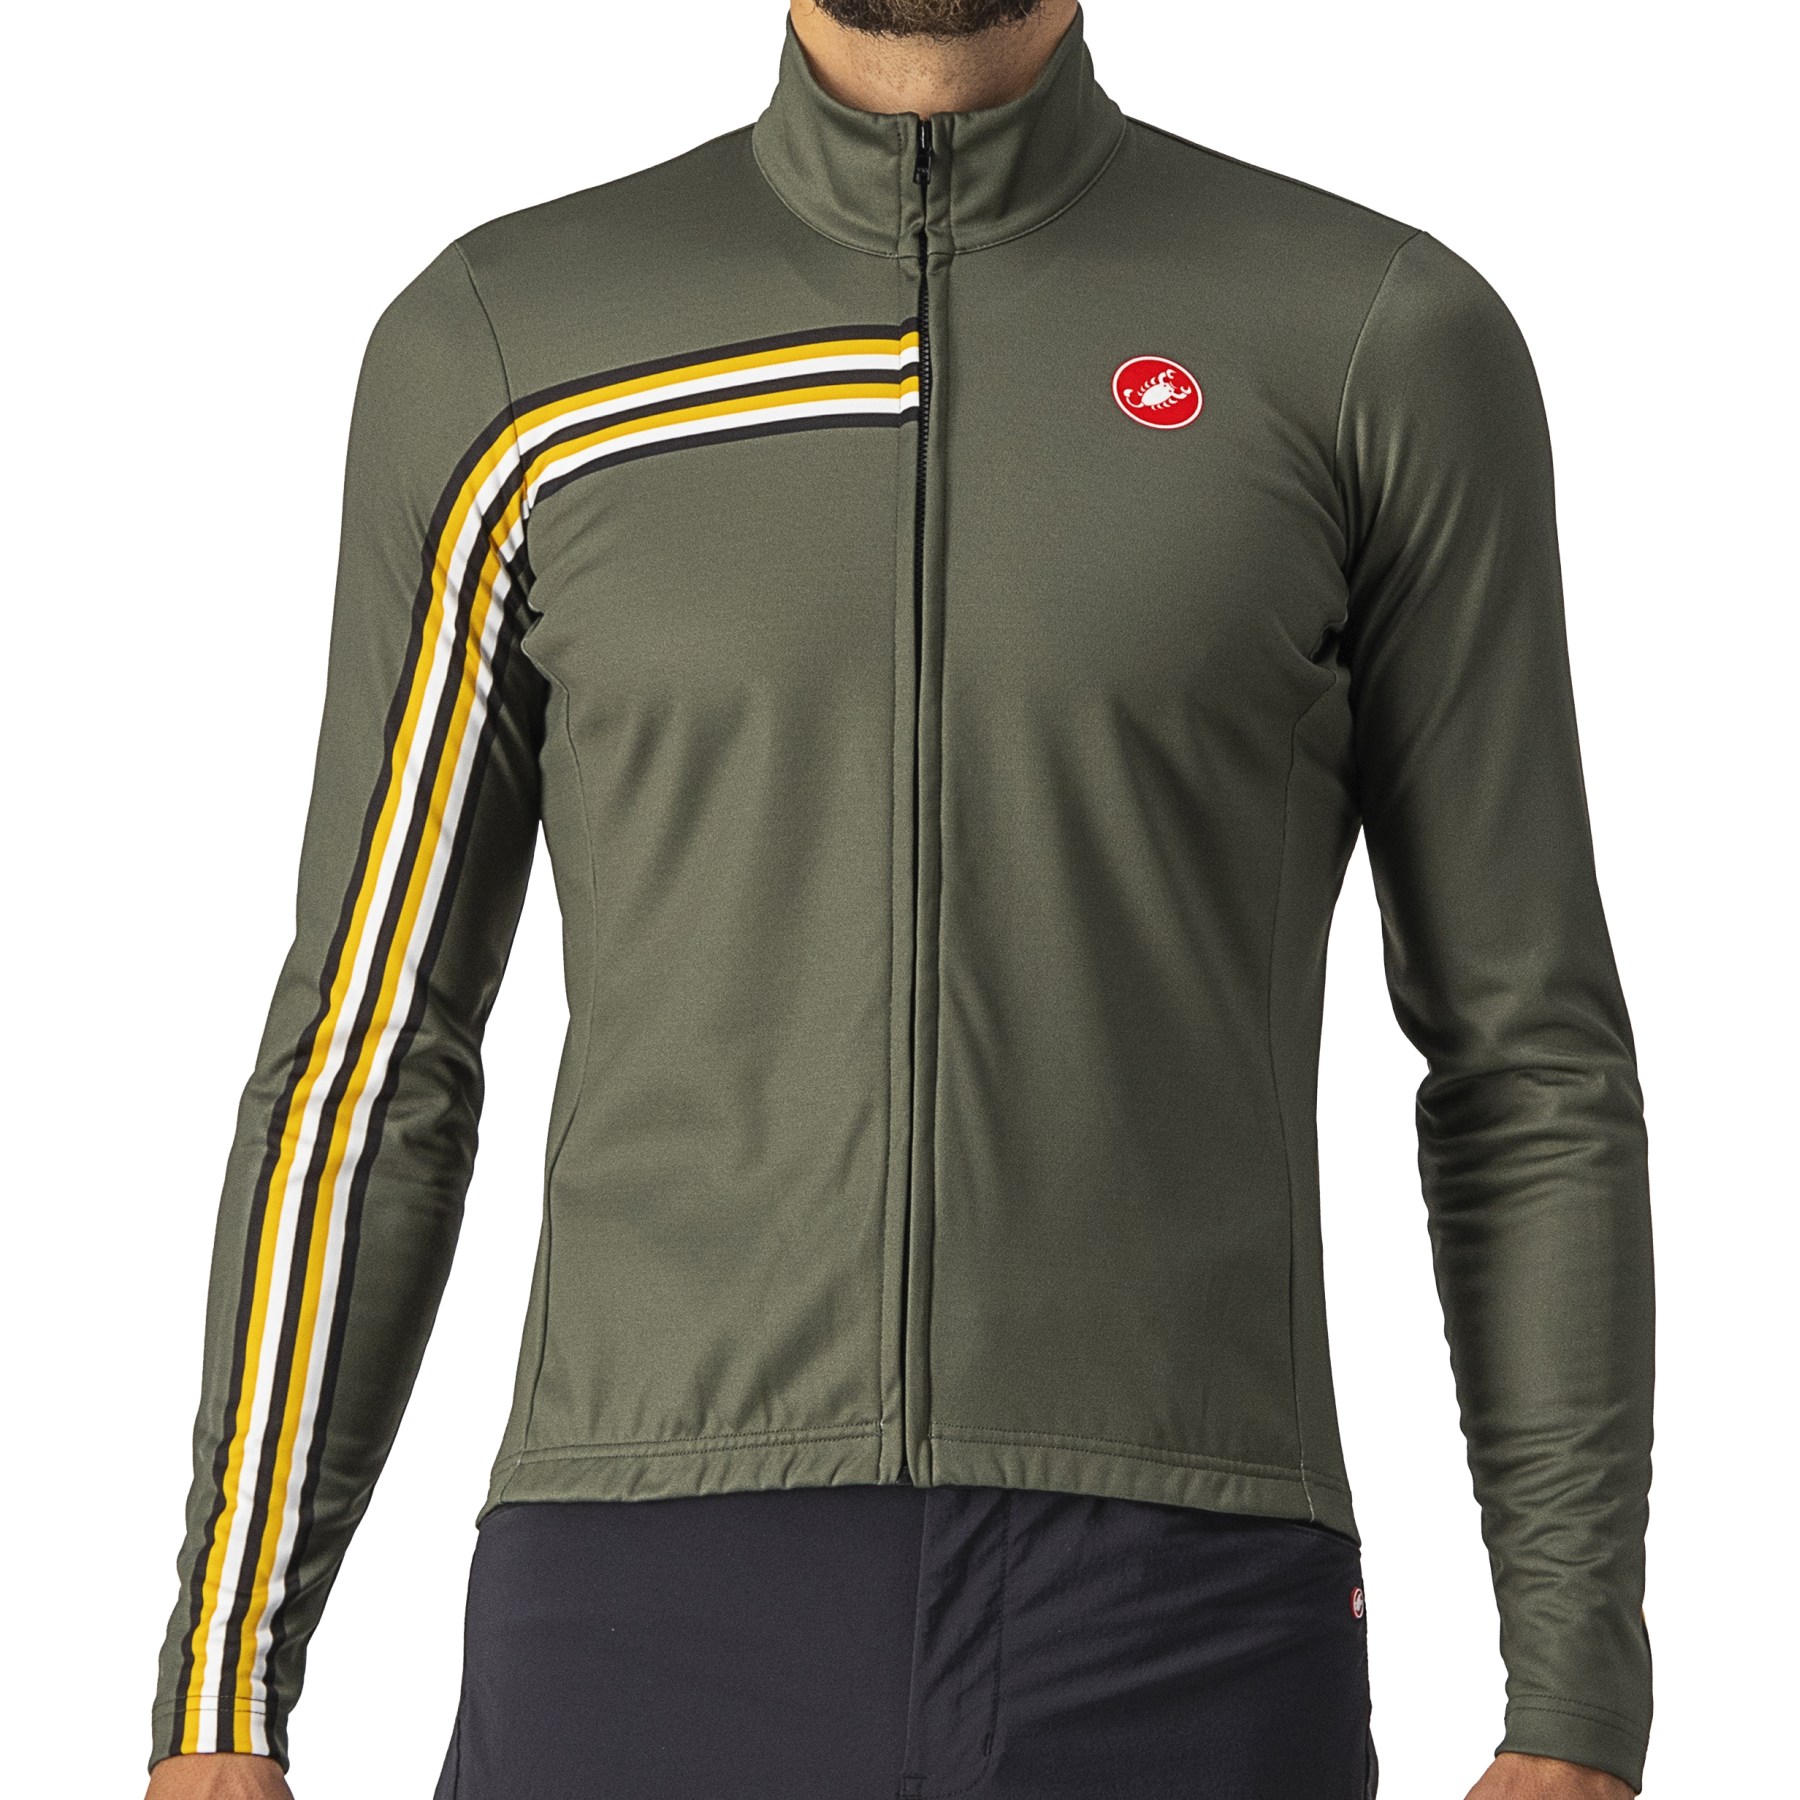 Image of Castelli Unlimited Thermal Jersey - military green/goldenrod 075